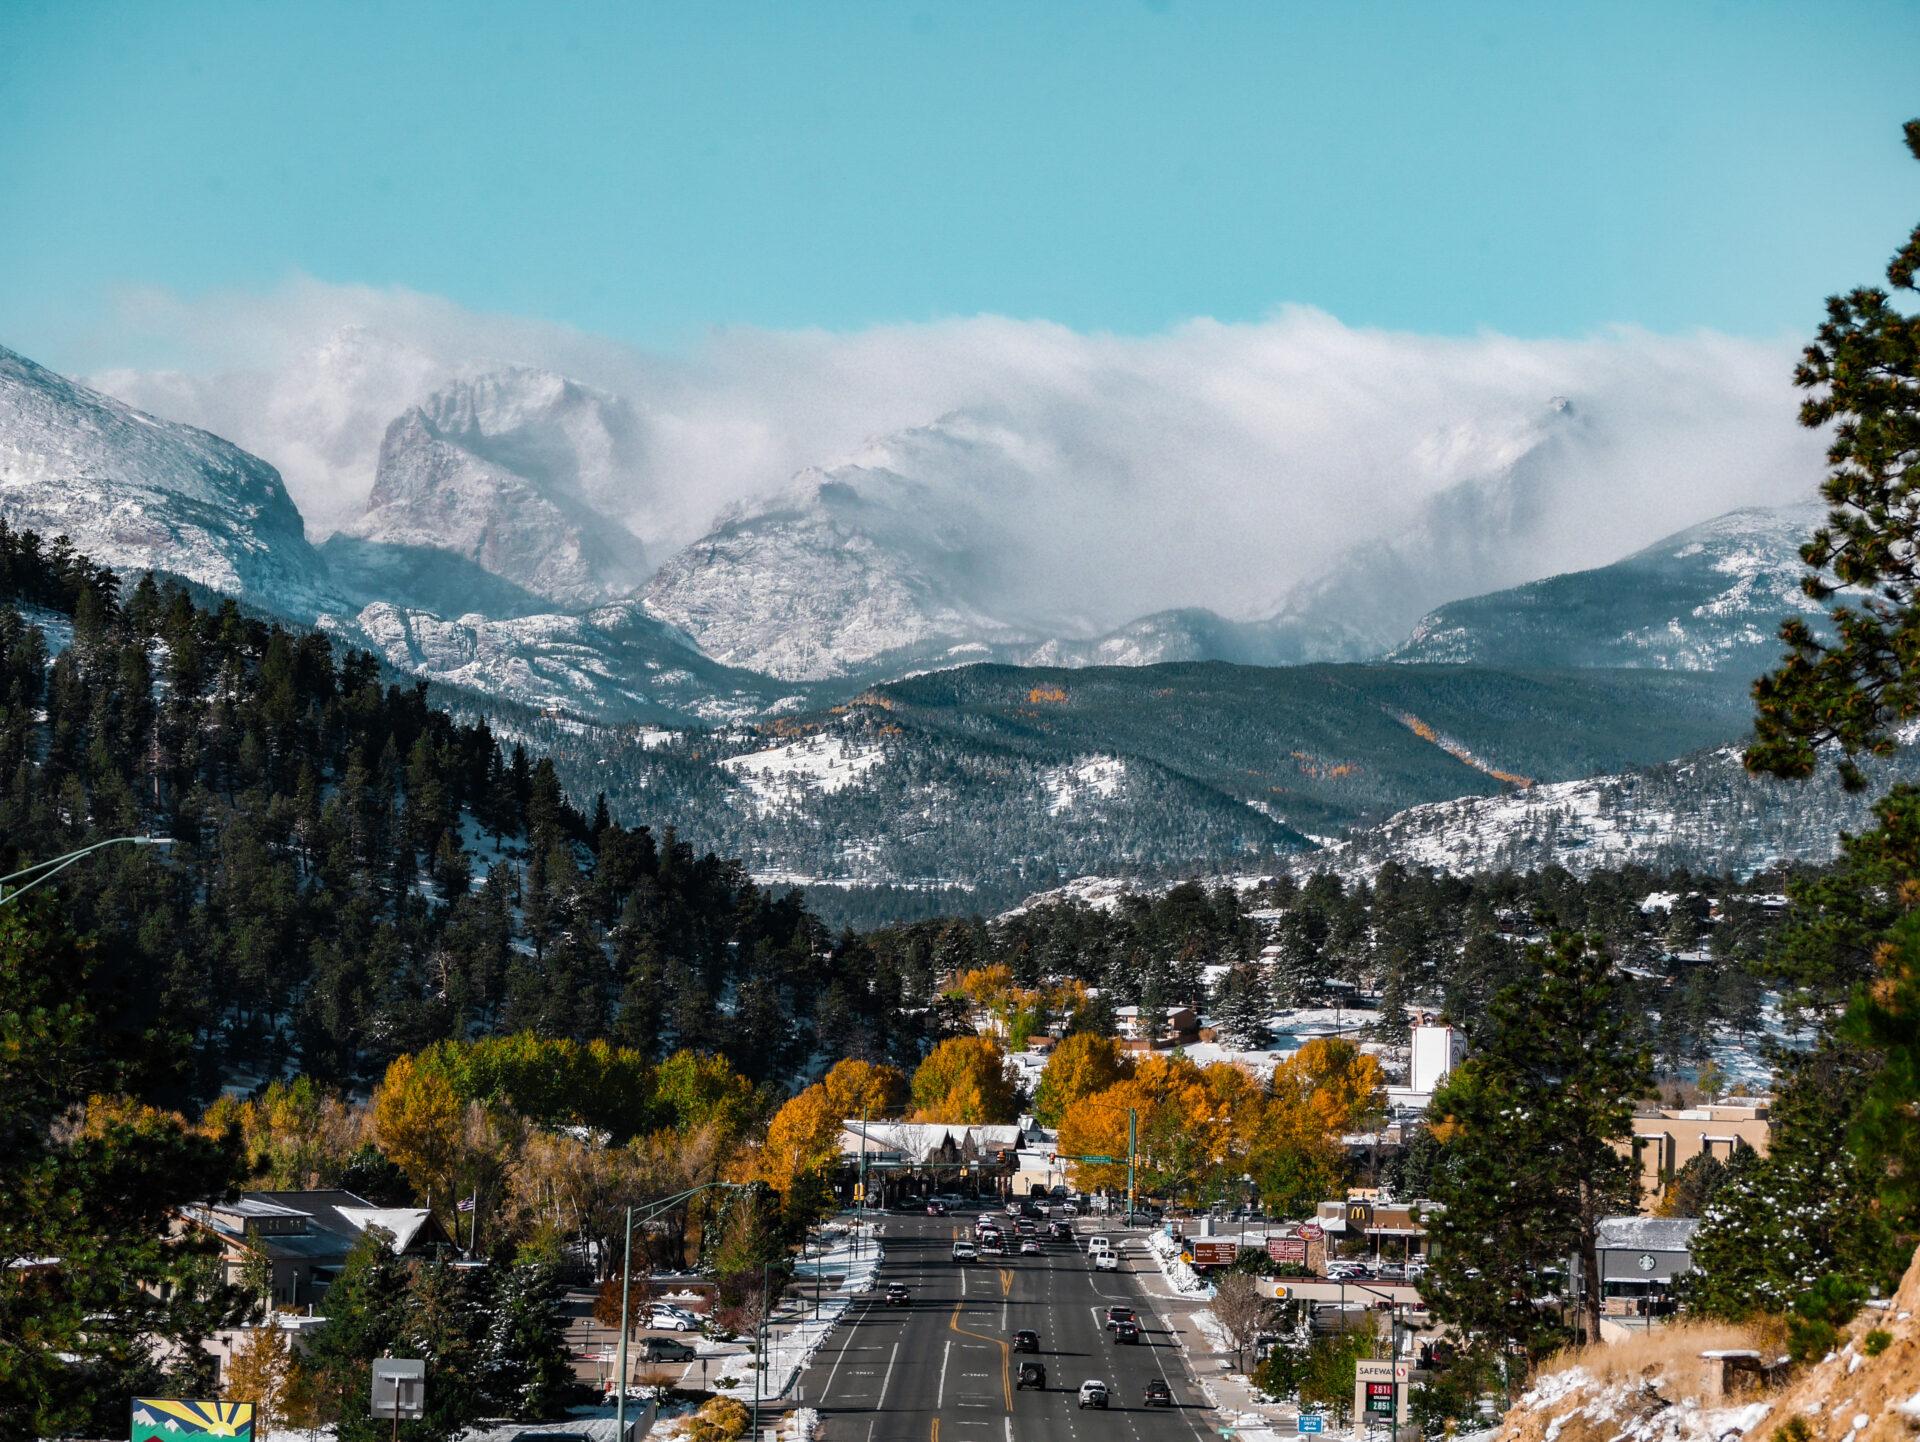 Enjoy Estes Park in November and the Late Fall